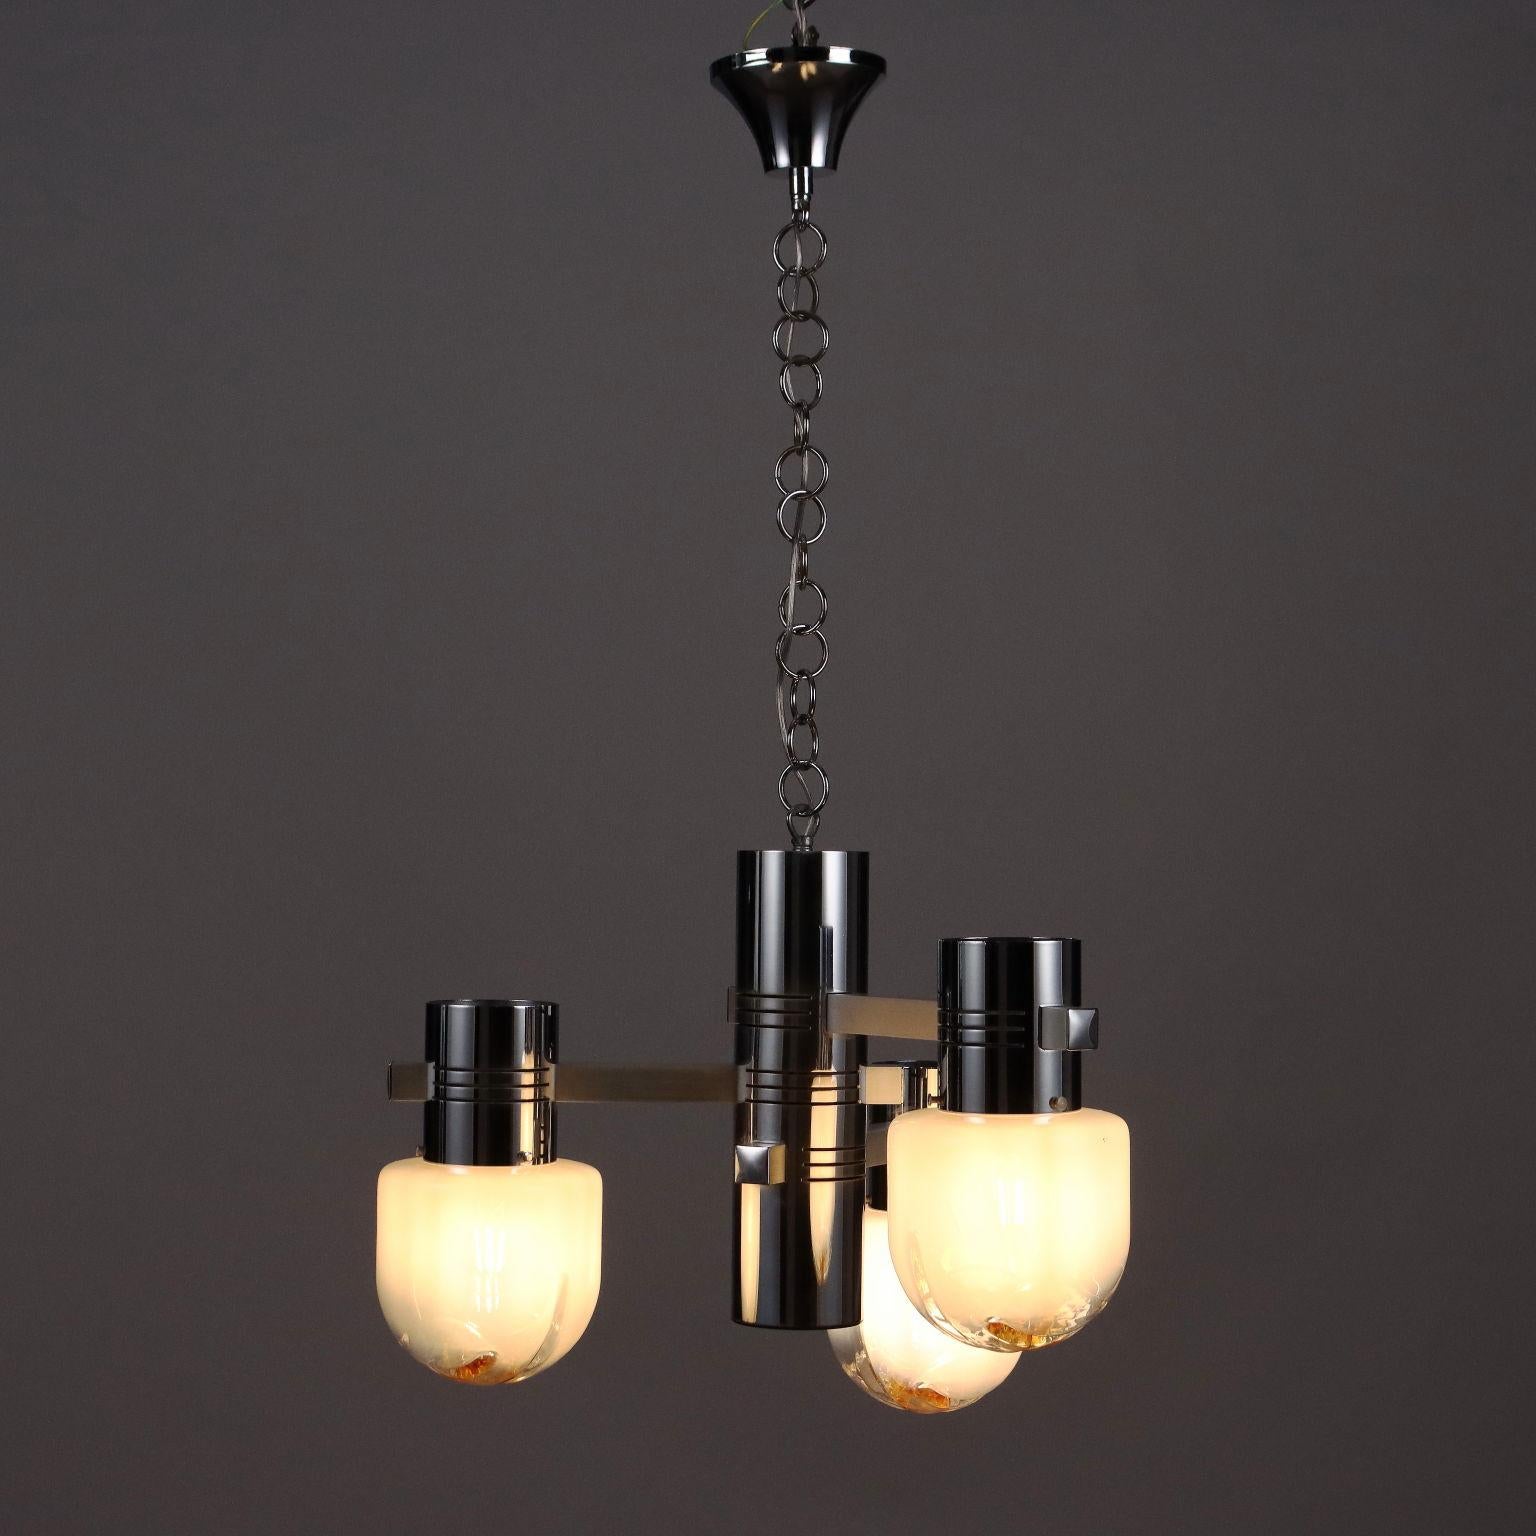 Ceiling lamp made of chrome-plated aluminum and blown glass diffusers.